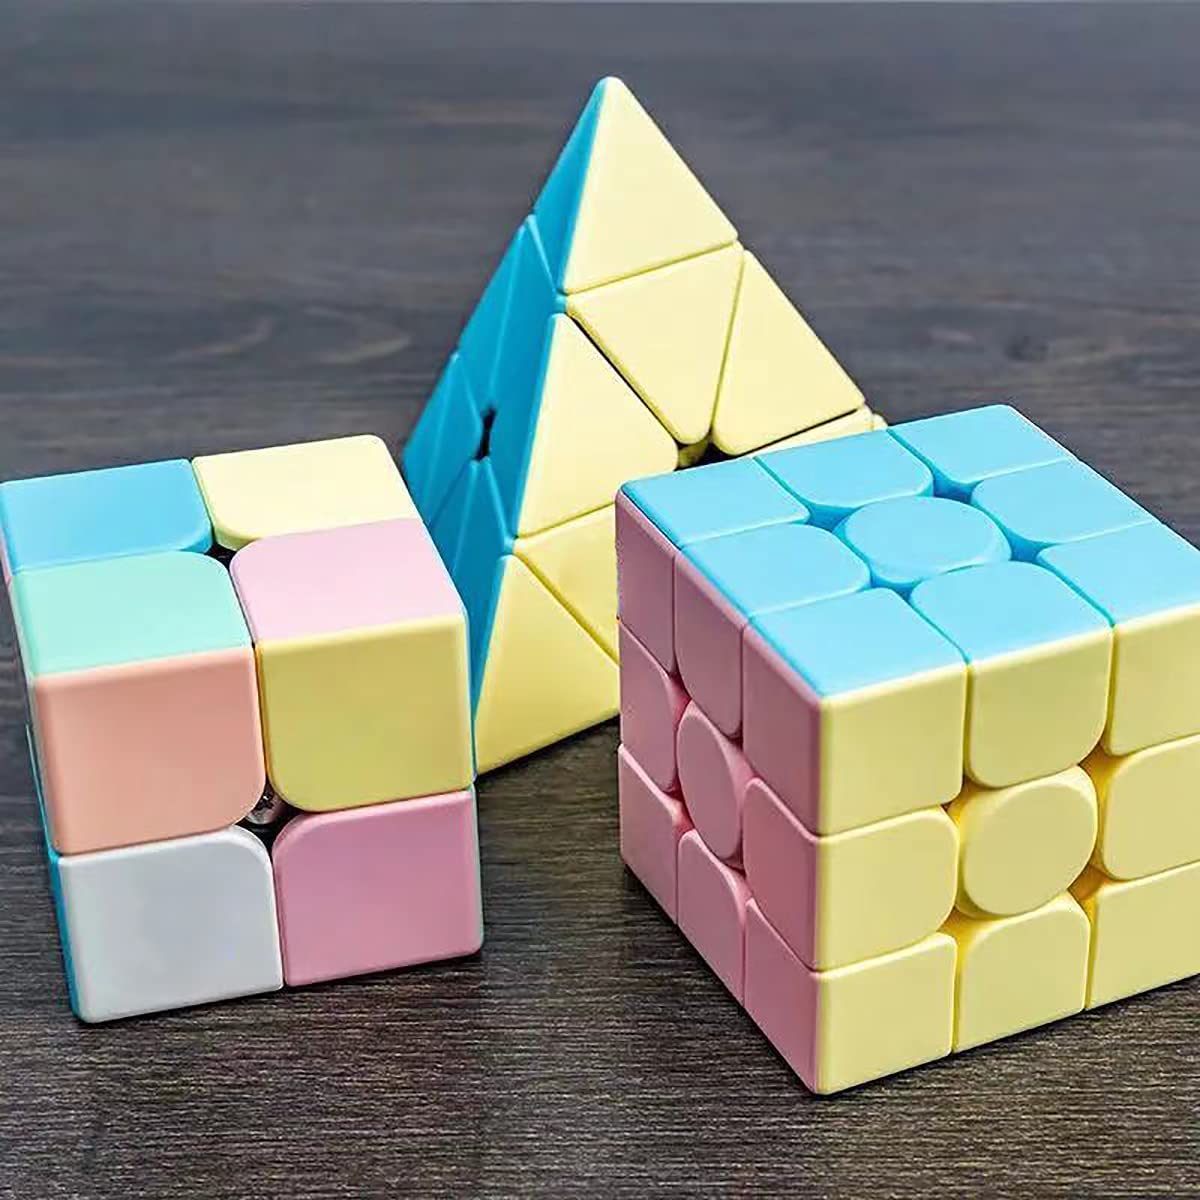 Magic Cube Set, Educational Speed Cubes 3 Pack of 2x2x2 3x3x3 Pyramid Smooth Puzzle Cube - amzGamess